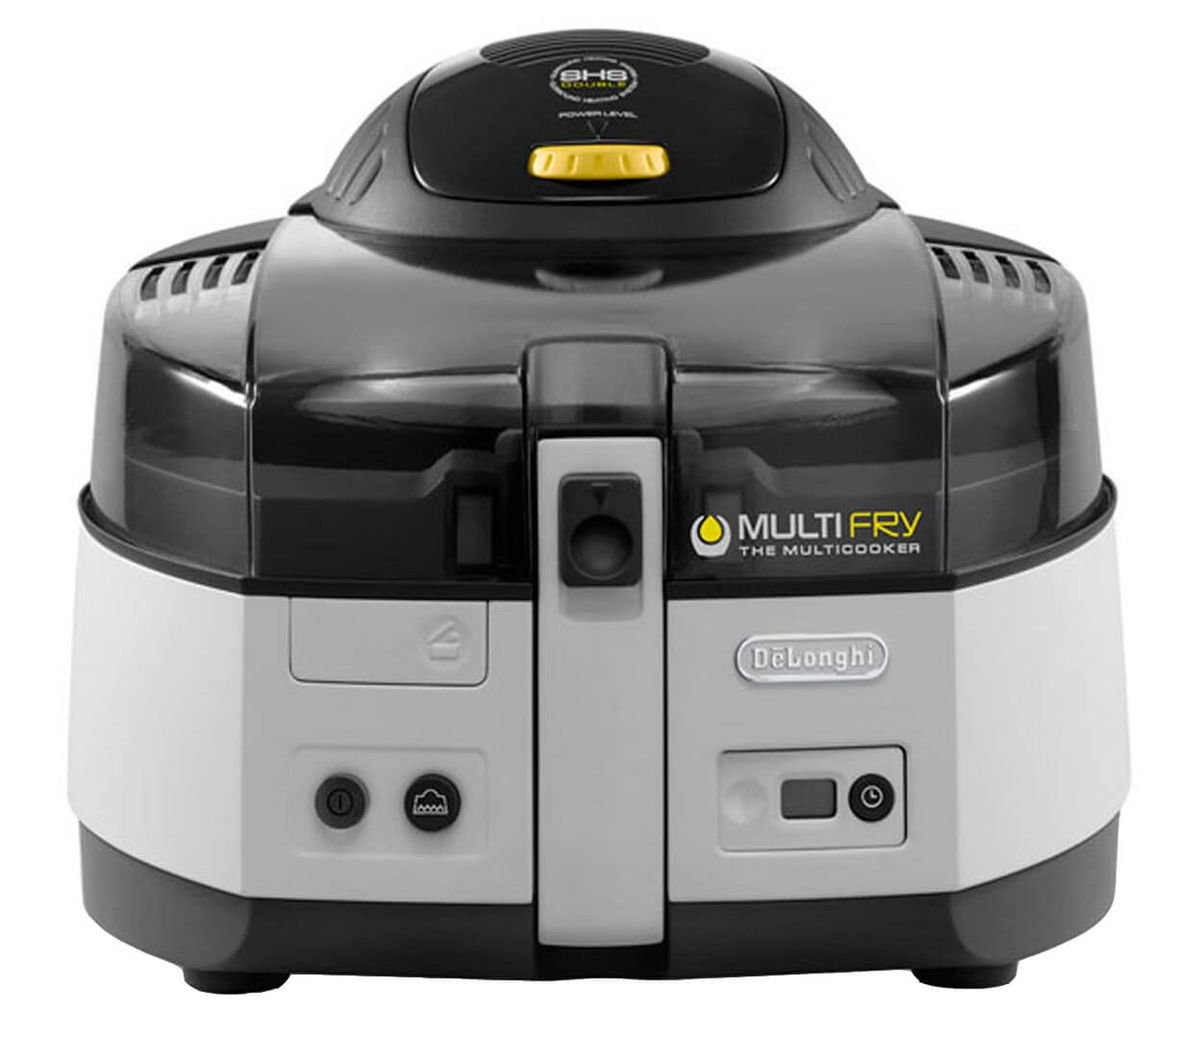 Image of De'Longhi MultiFry Multicooker FH1163/1 Classic Friteuse bei nettoshop.ch